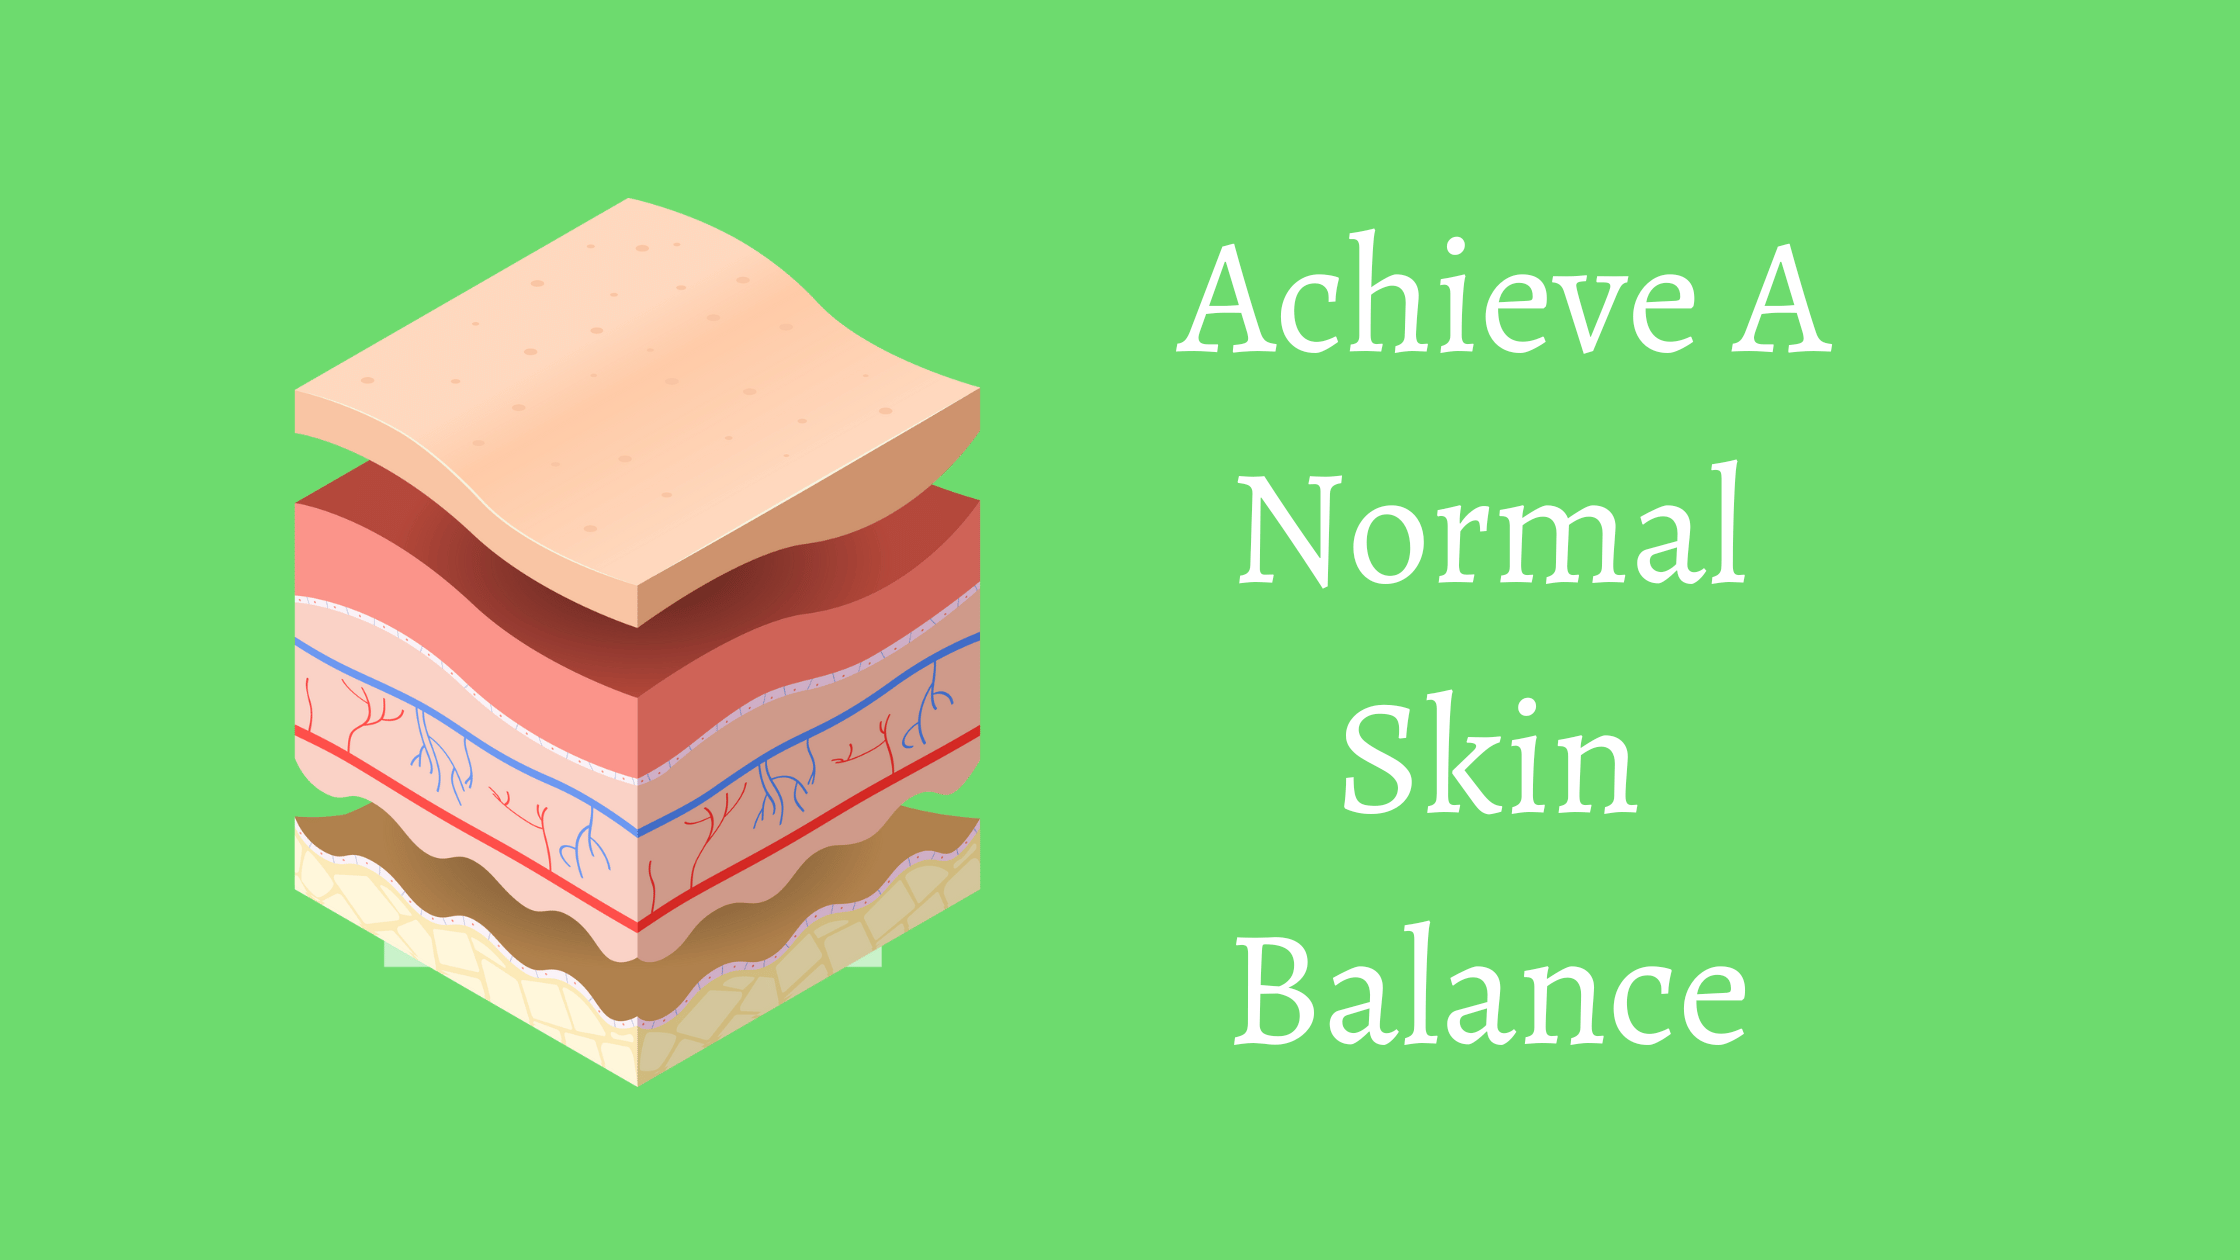 Tips & Tricks That Will Help You Achieve A Normal Skin Balance